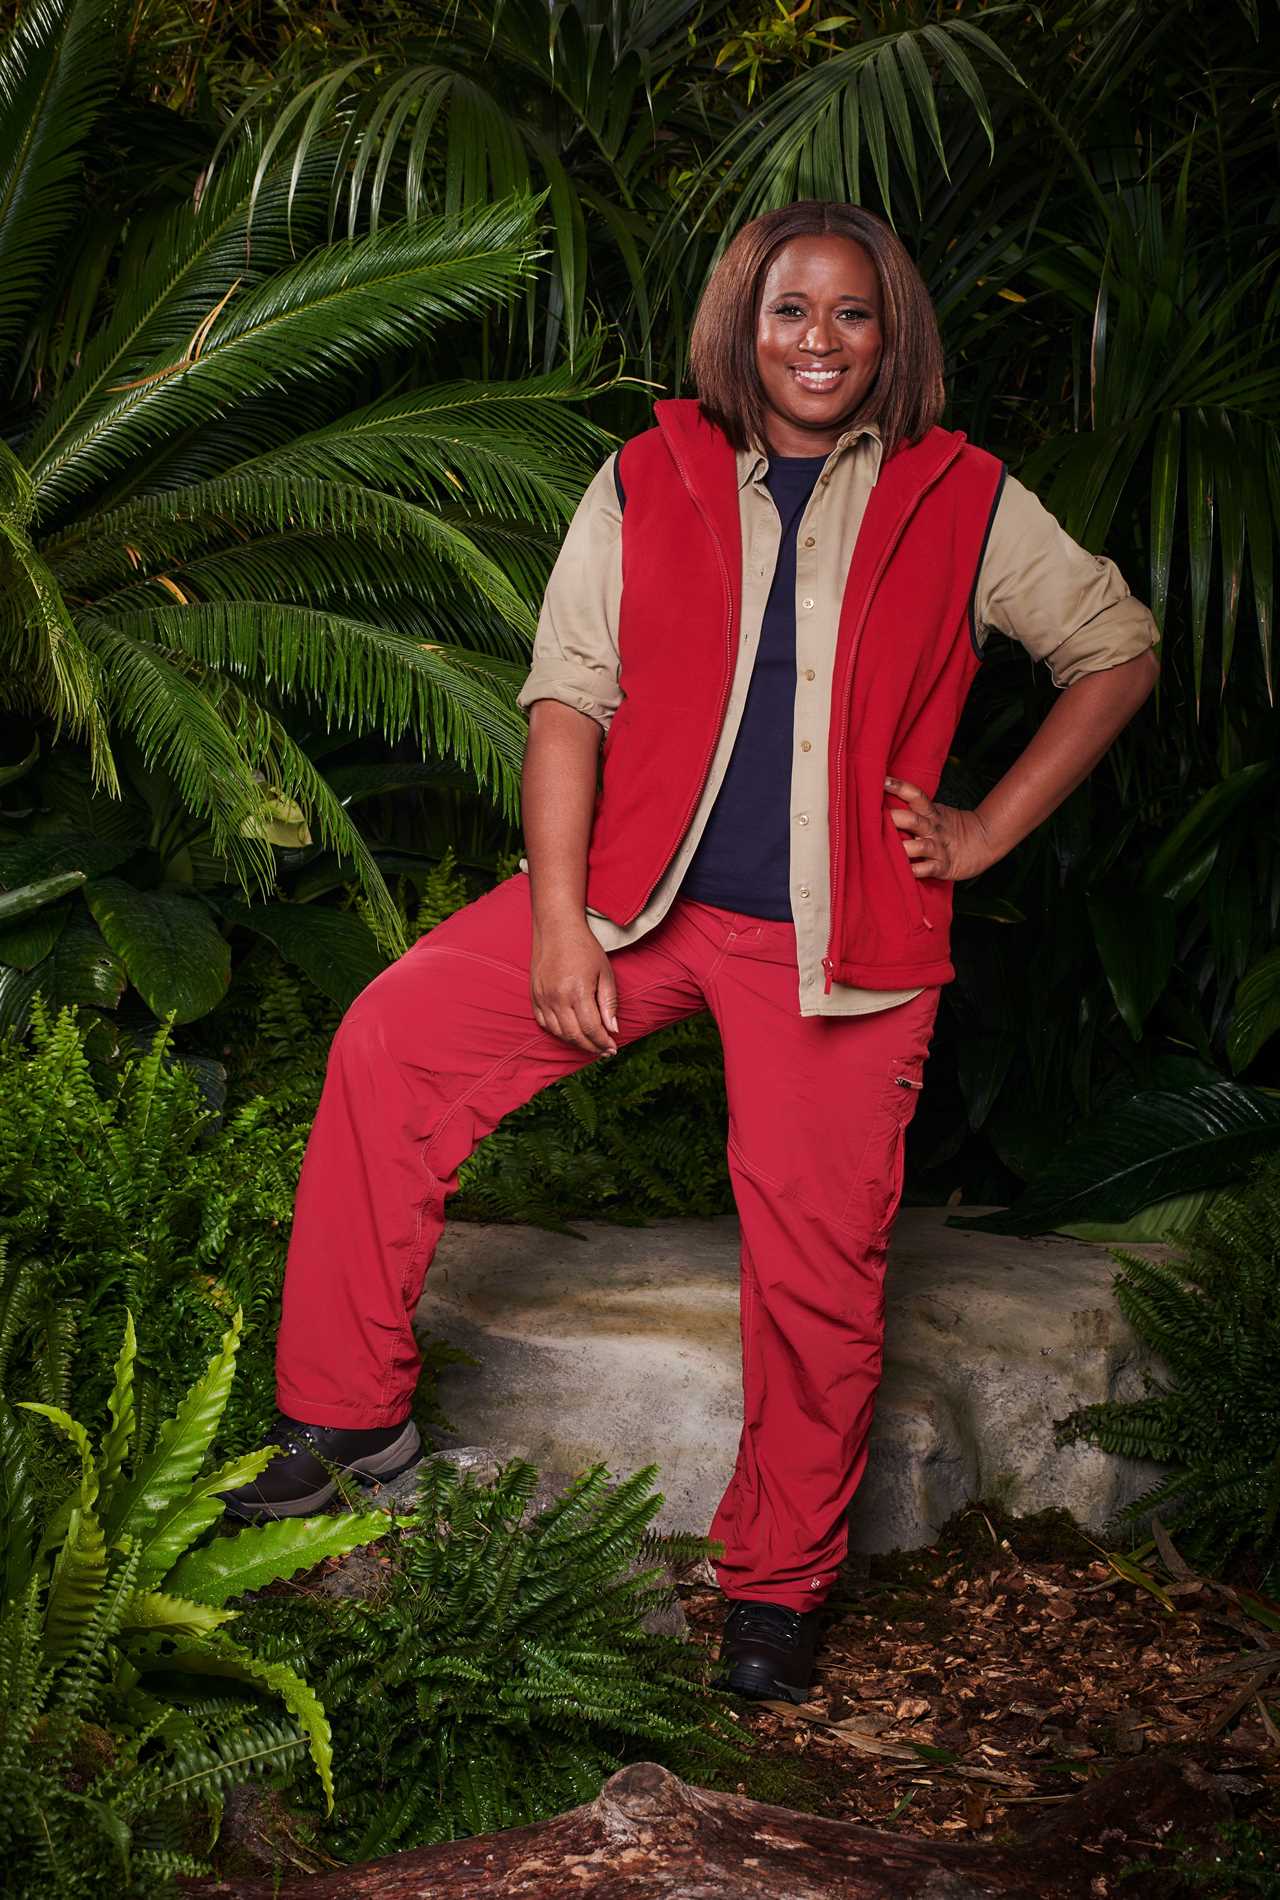 I’m A Celeb star reveals camp secret that left stars ‘terrified’ as she shares warning ahead of new series